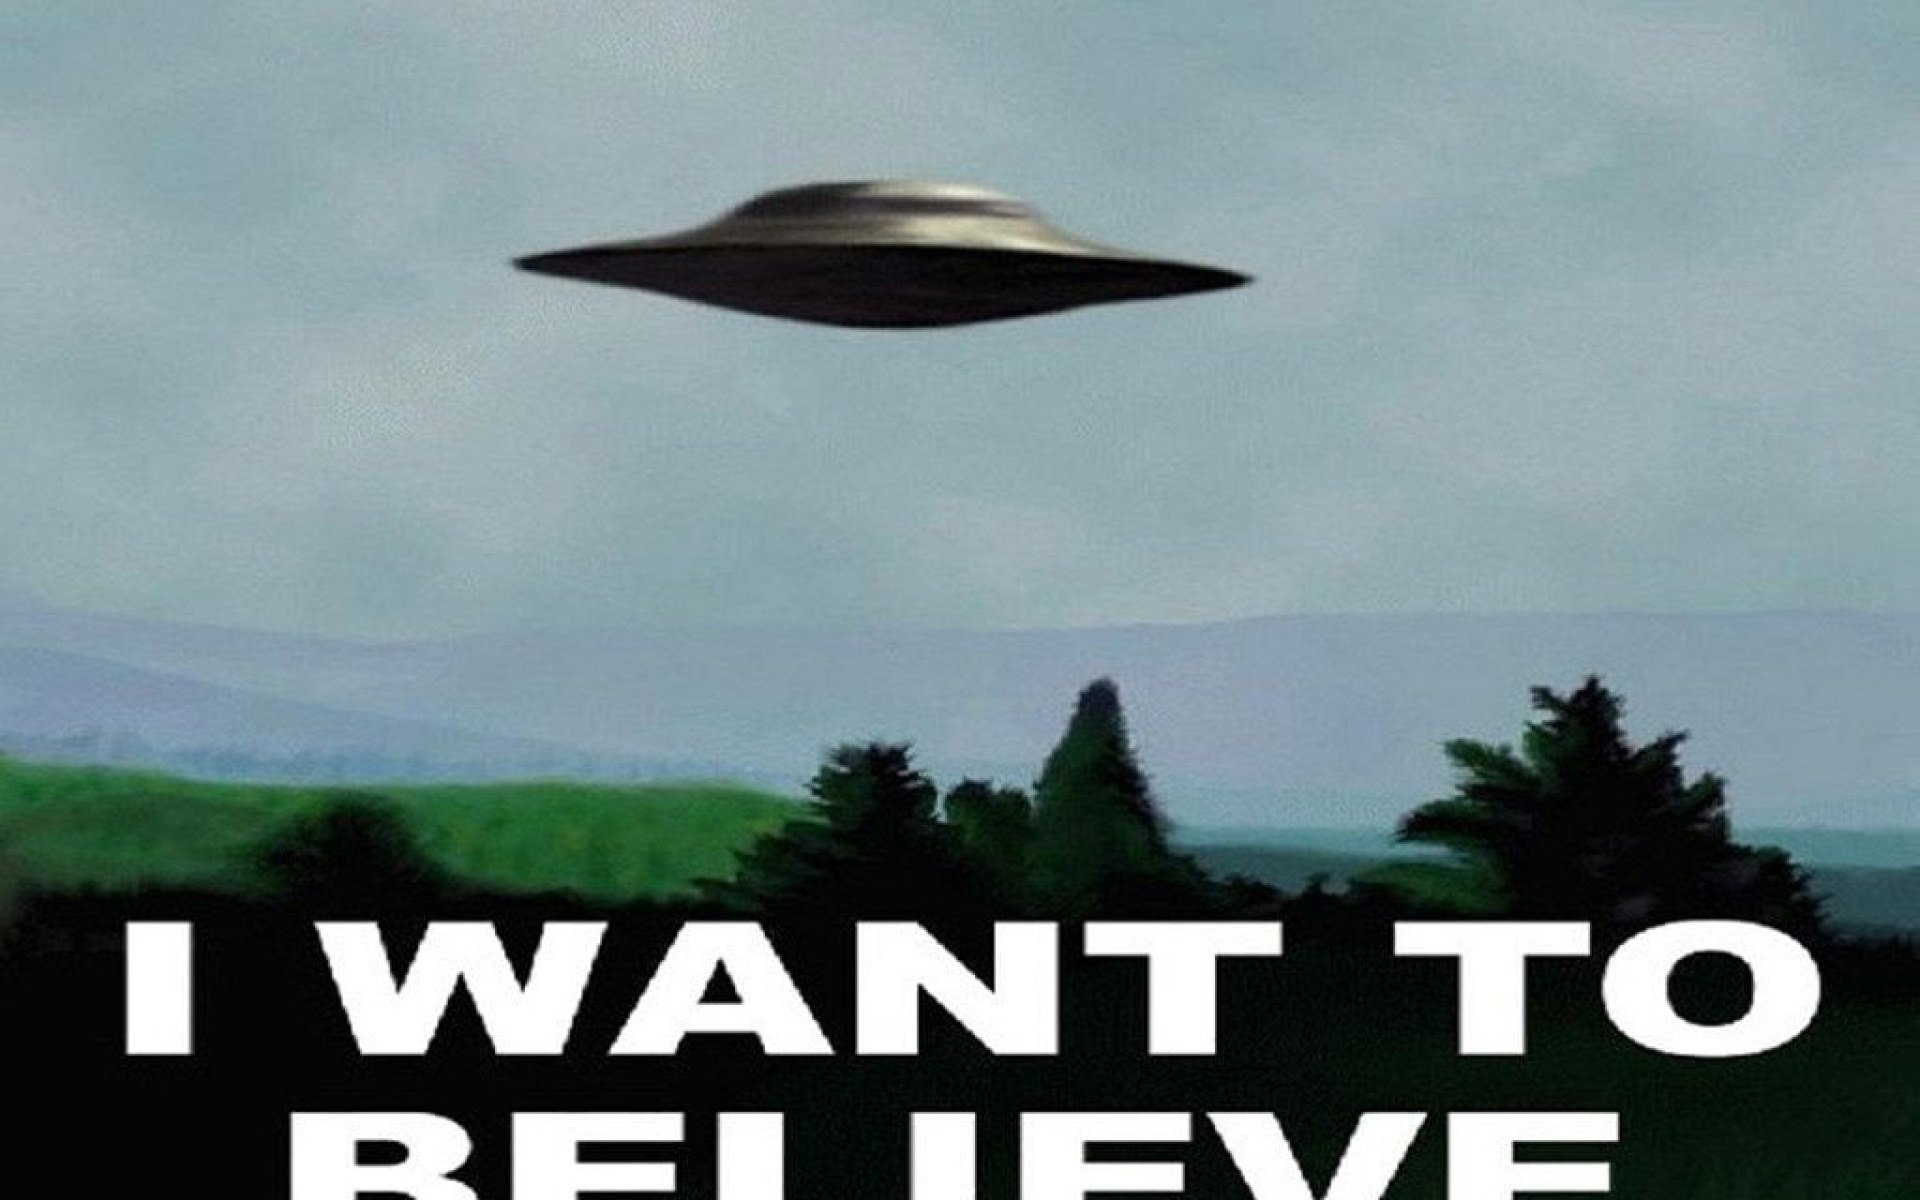 I want a new one. I want to believe Постер Малдера. I want to believe секретные материалы. Плакат секретные материалы i want to believe. I want to believe утопия шоу.